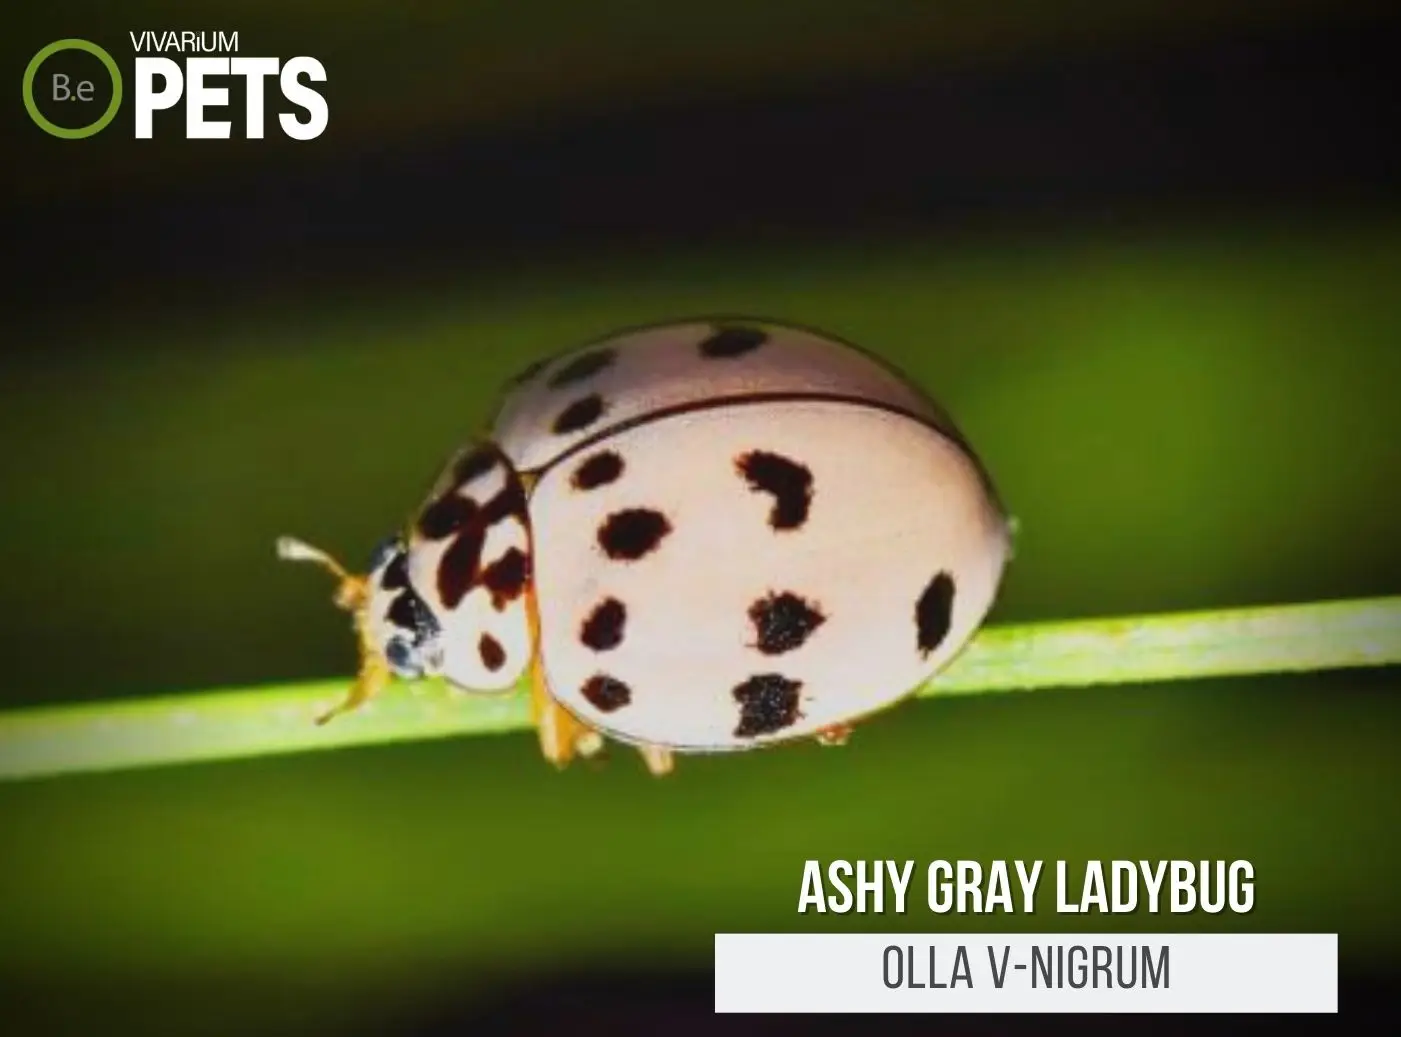 The mighty ladybug has a voracious appetite for more than just